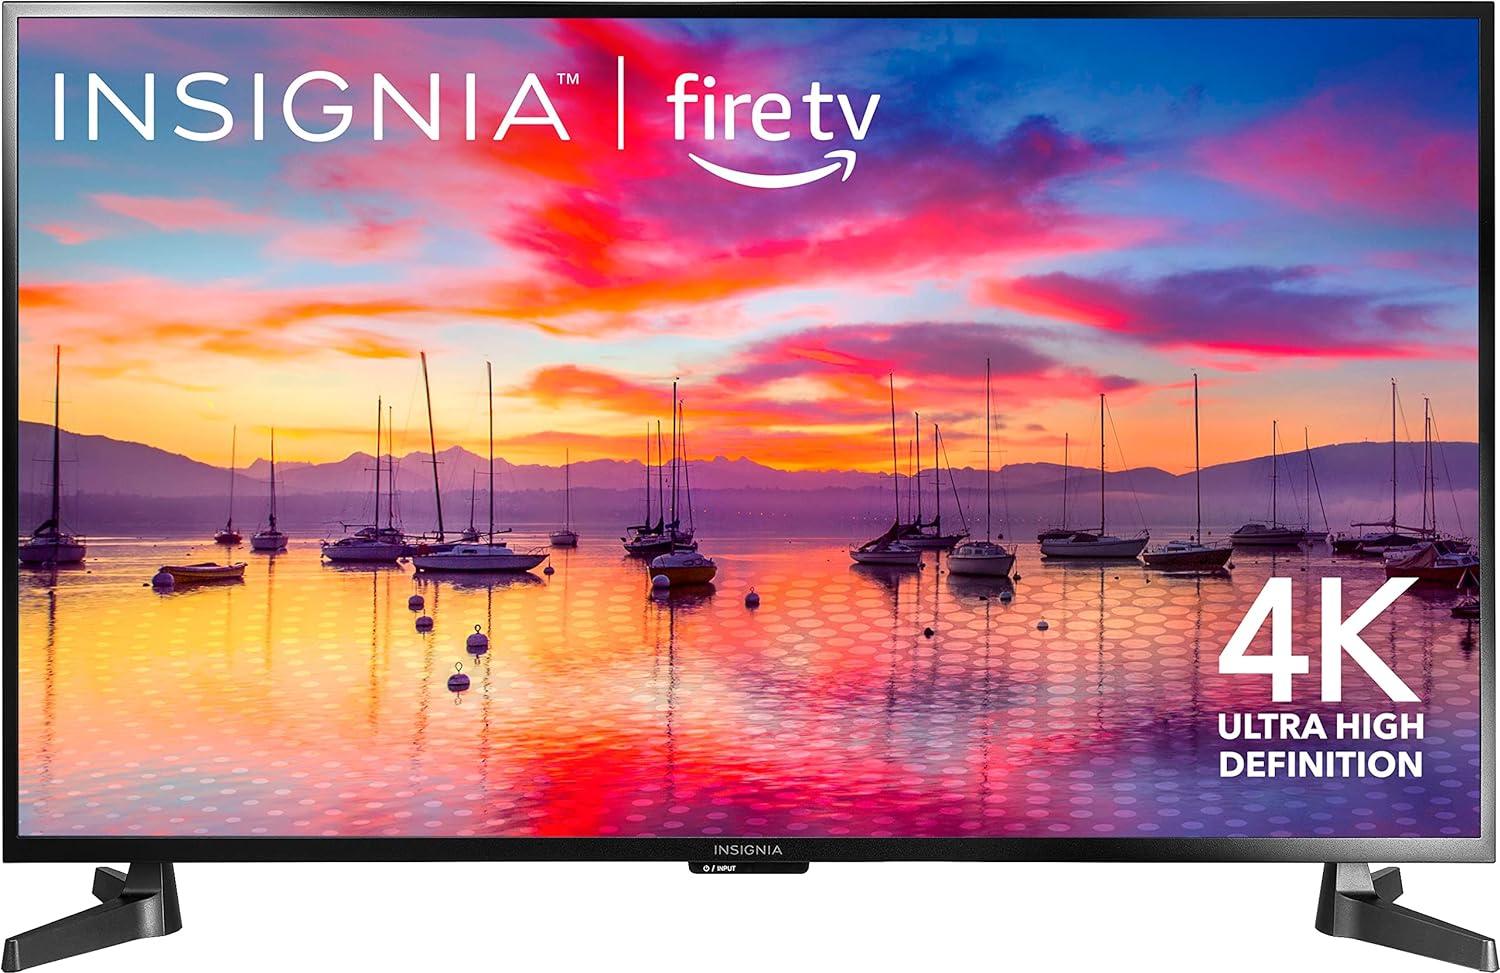 43in Insignia F30 4K UHD HDR Smart Amazon Fire TV for $99.99 Shipped